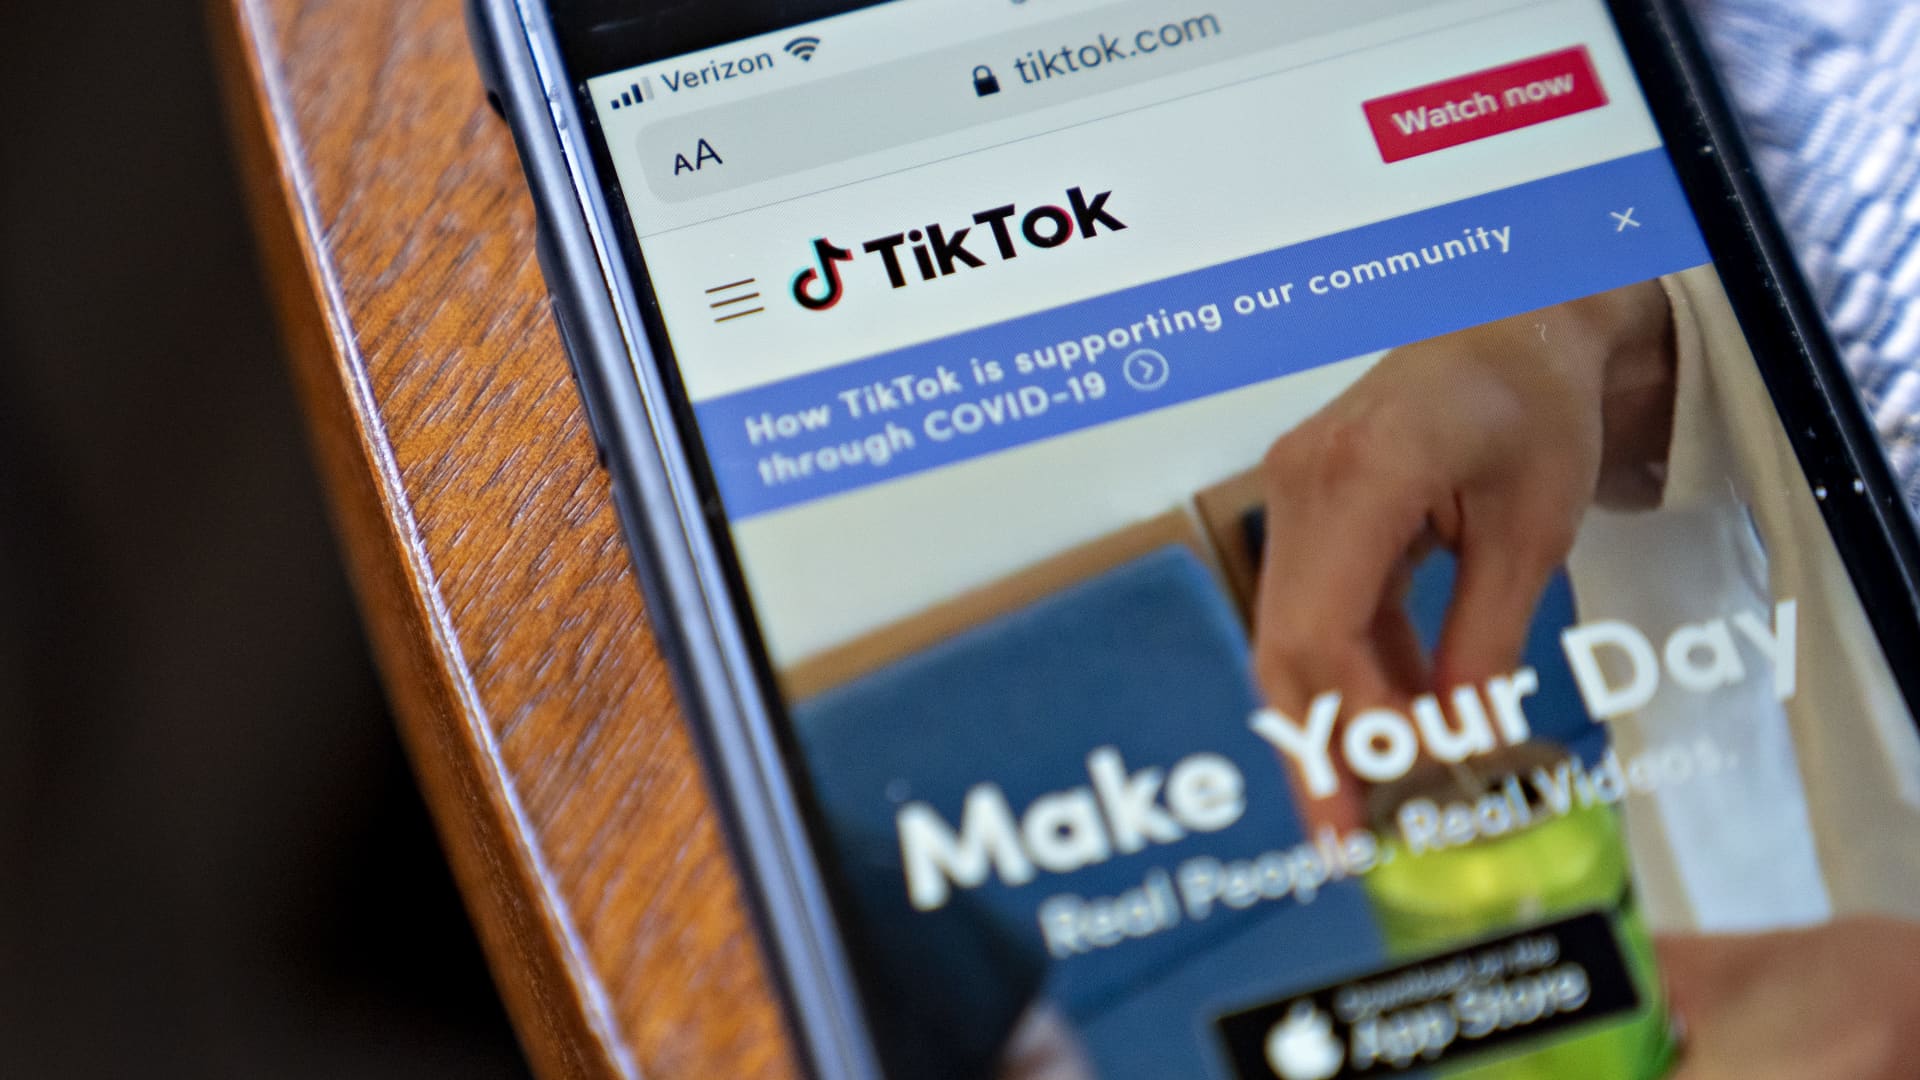 TikTok relying on Trump to back off original demand to sell U.S. business and approve Oracle deal